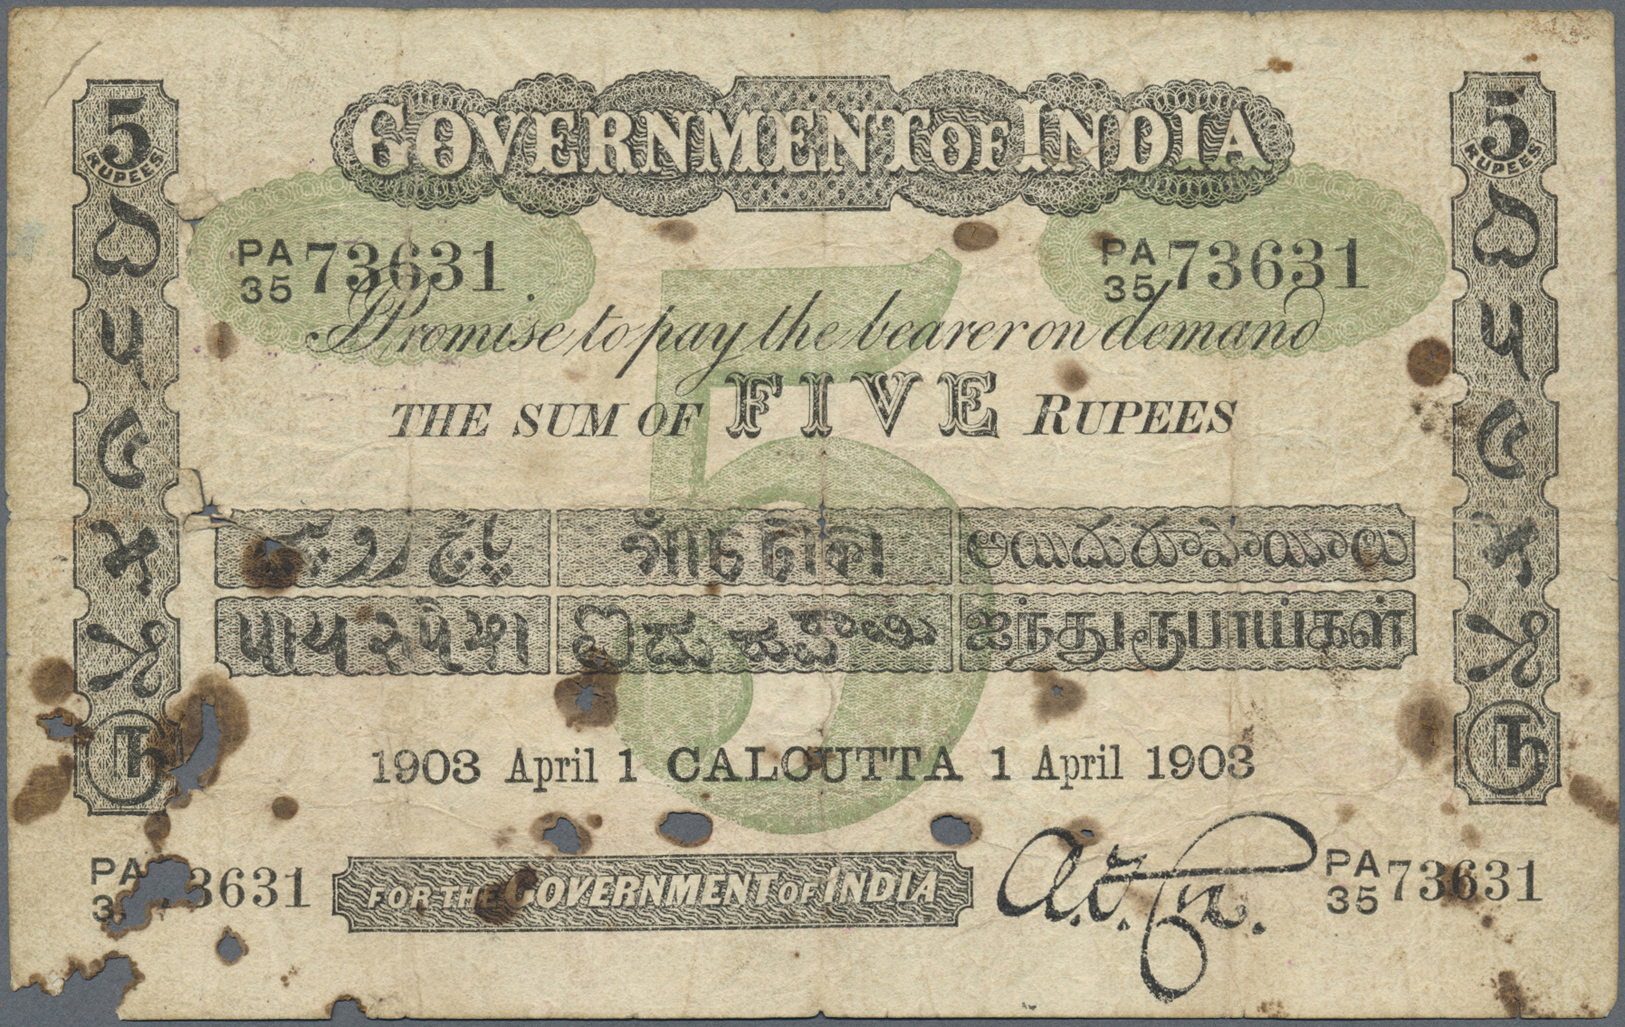 01033 India / Indien: Government Of India 5 Rupees 1903 P. A3, CALCUTTA Issue, Used With Folds And Crease, Stained Paper - India